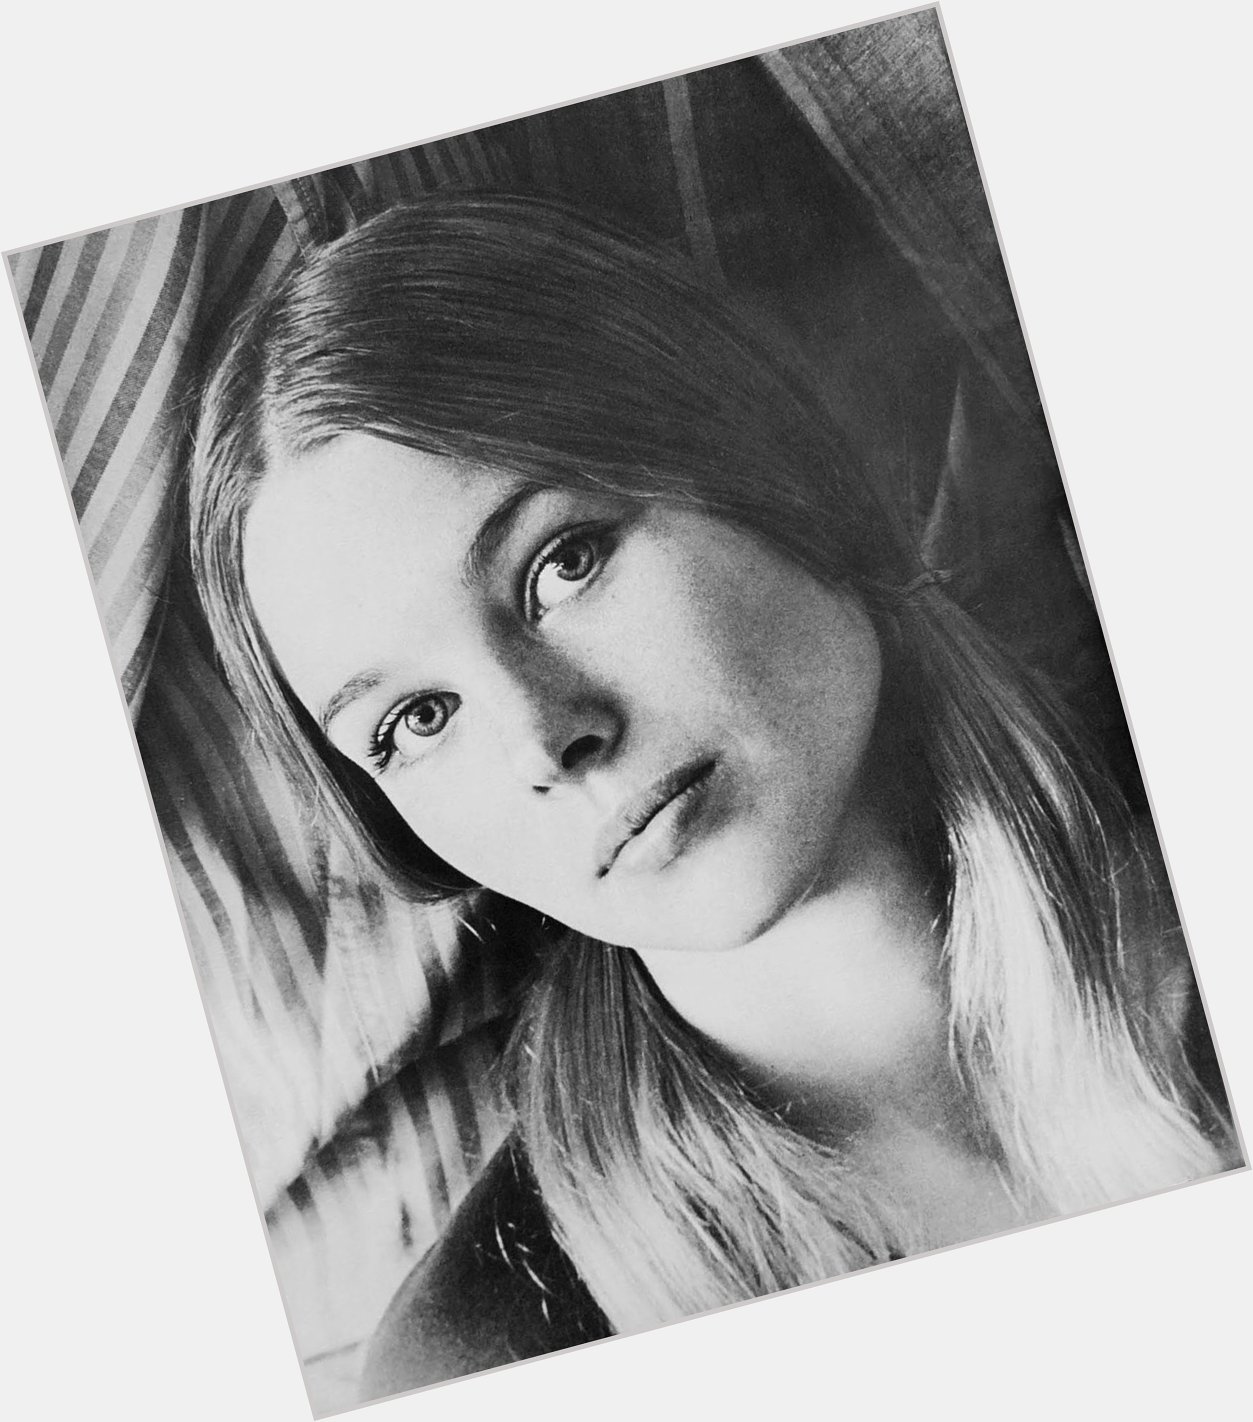  Happy Birthday to your mom, Michelle Phillips. 